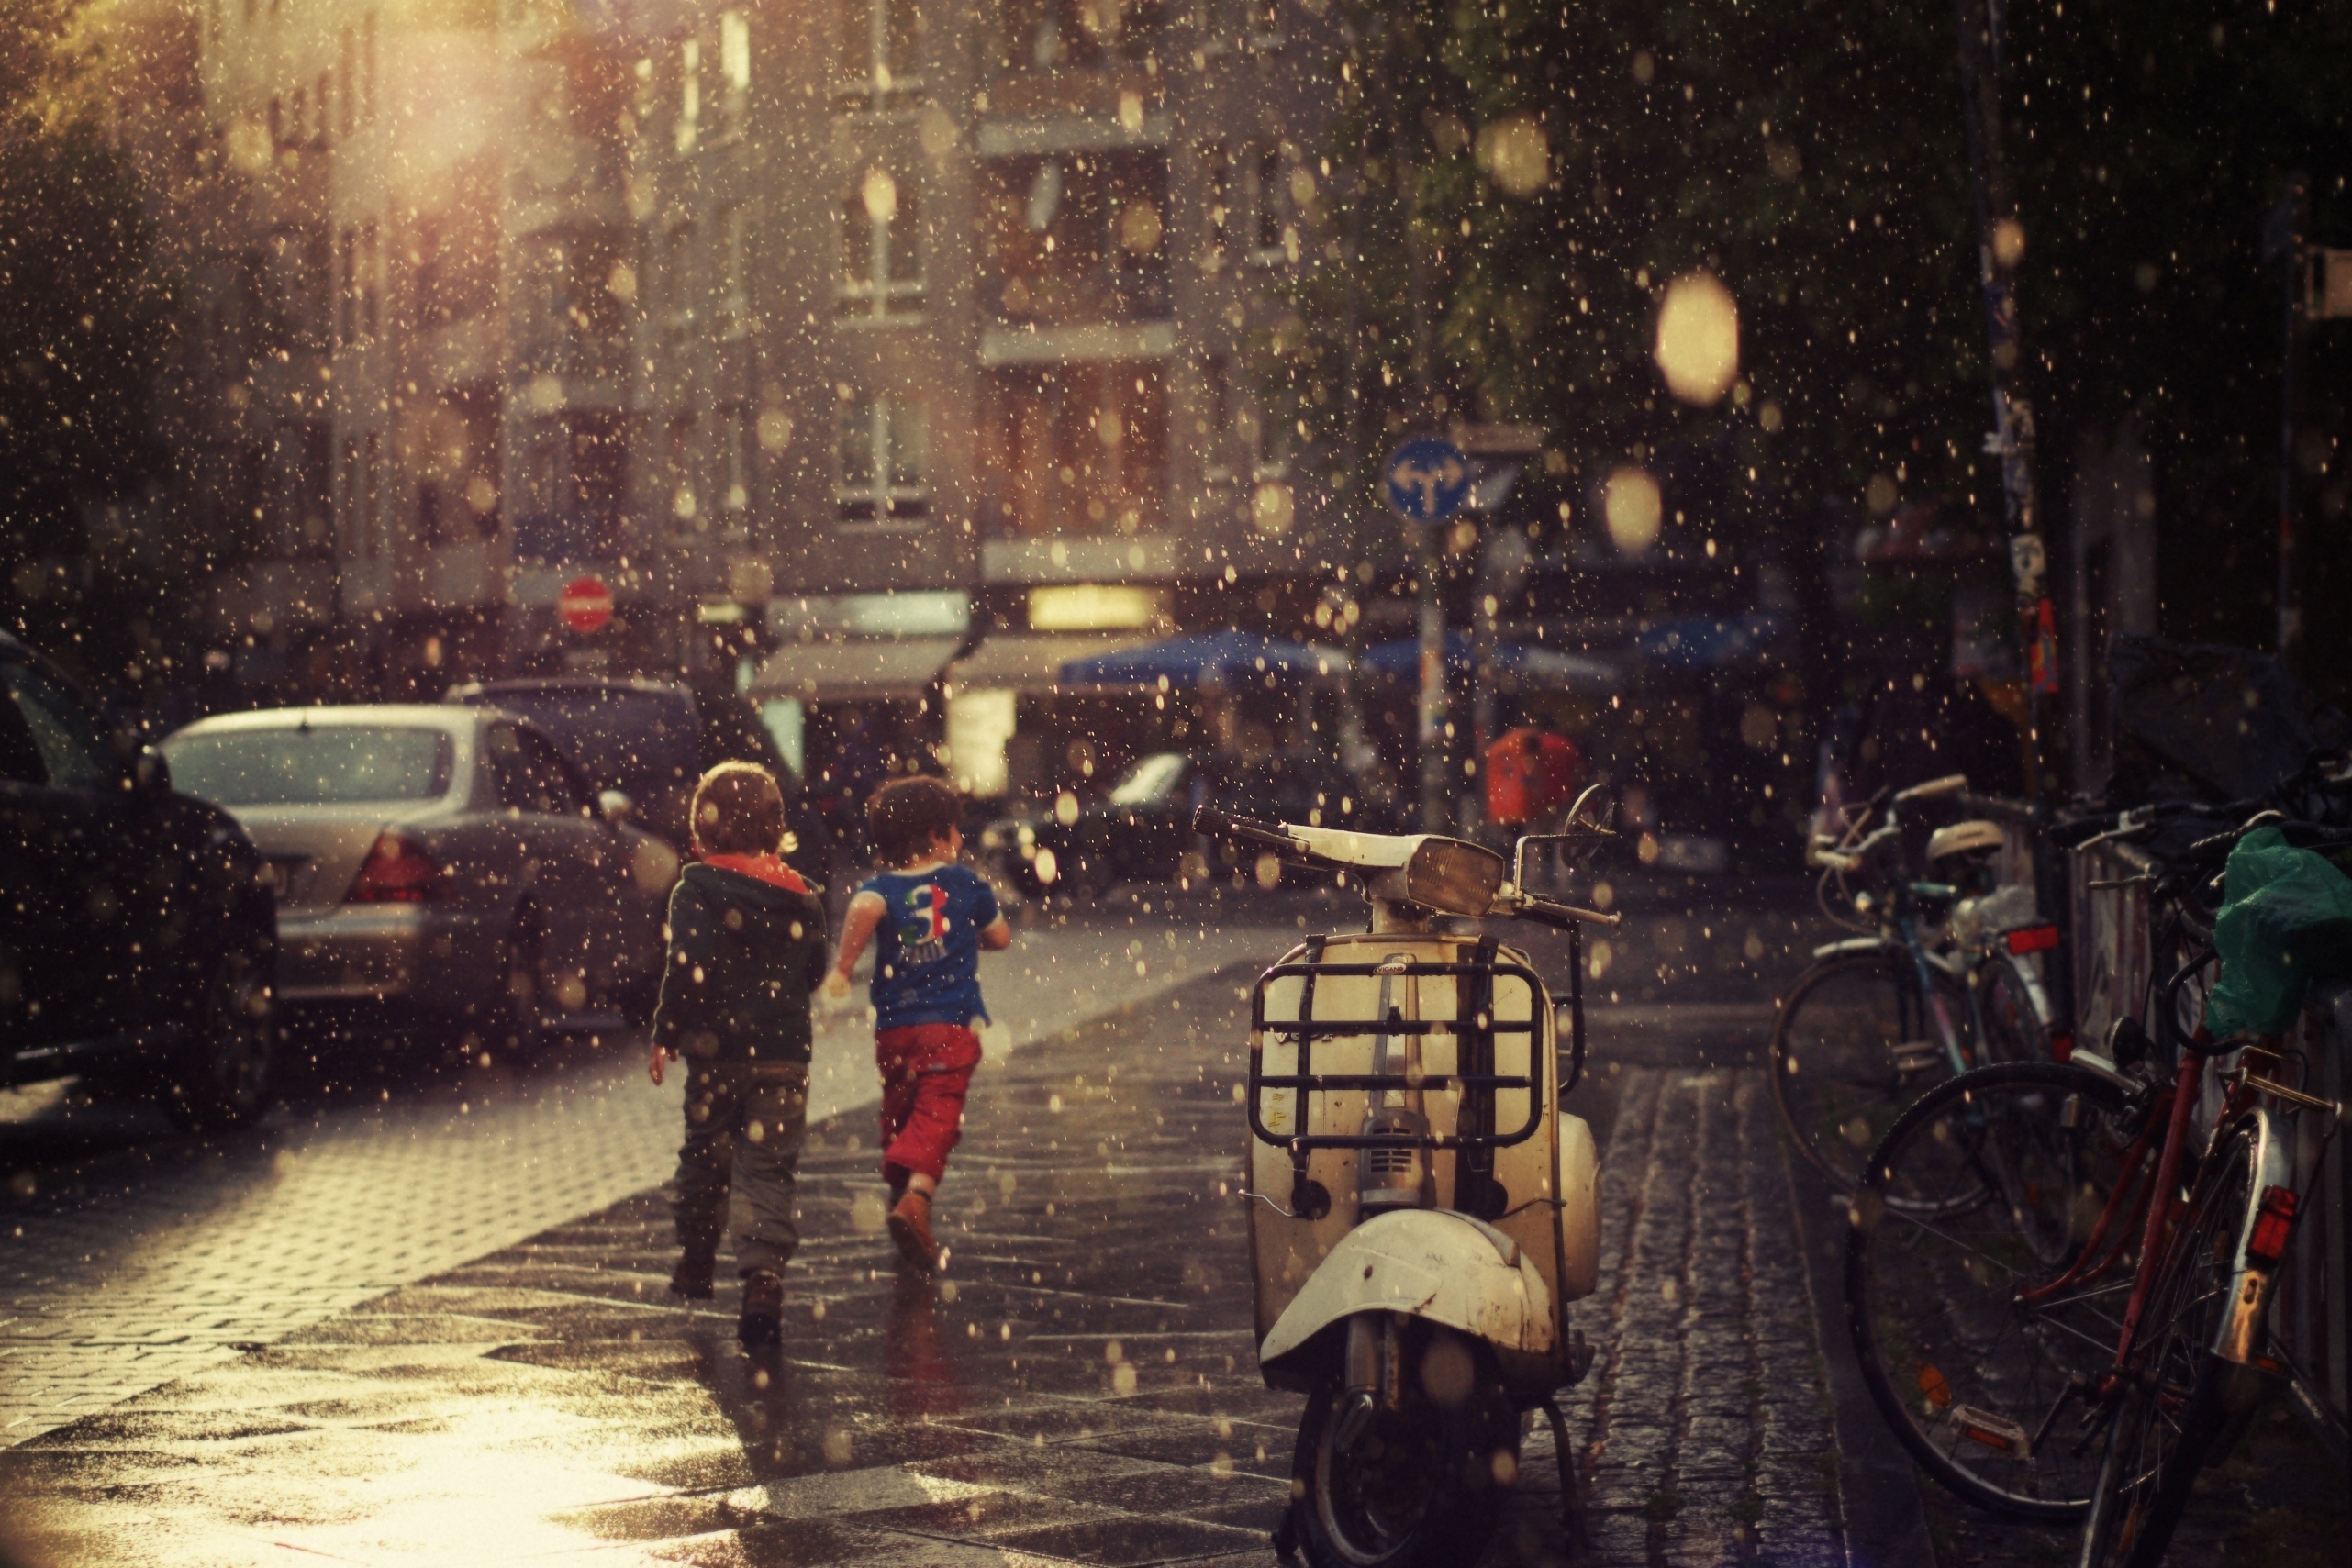 rain, Rain drops, Water drops, Drops, Children, People, Vehicles, Scooters, Motorcycles, Places, Cities, Architecture, Buildings, Photography, Roads Wallpaper